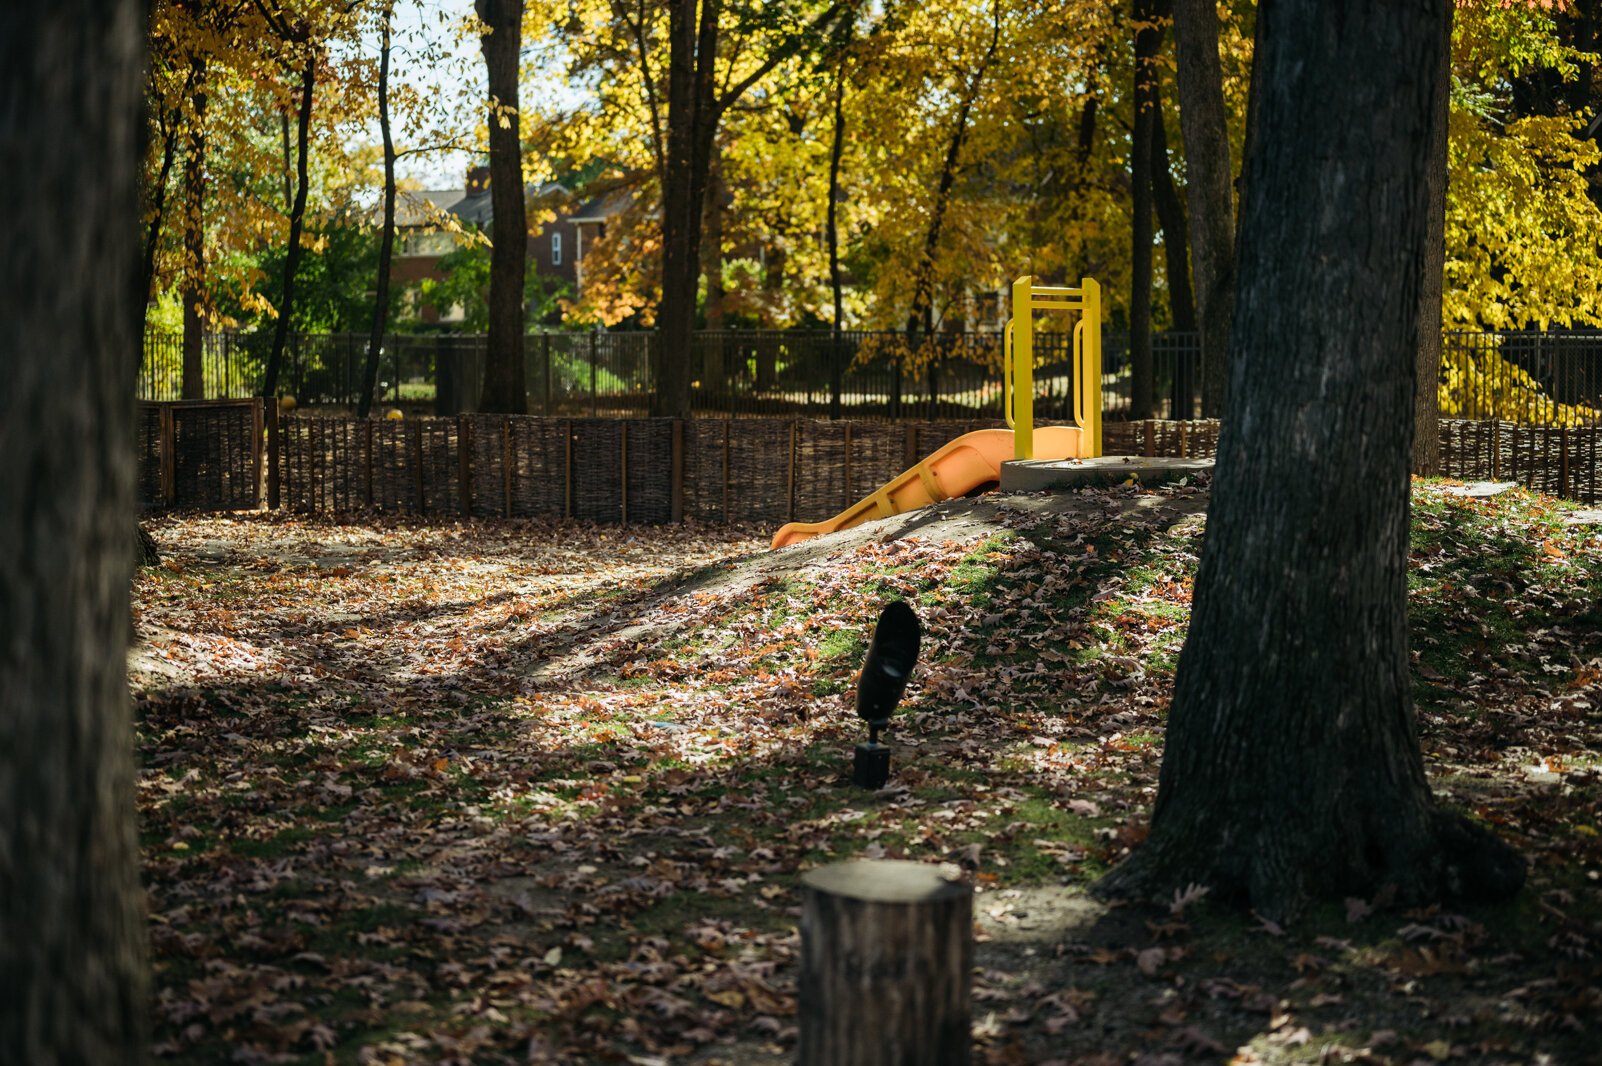 "The grove," is the center's biggest playground, situated within the surrounding neighborhood, where 3 to 4-year-olds play. Each classroom has it's own access to the nature park. 